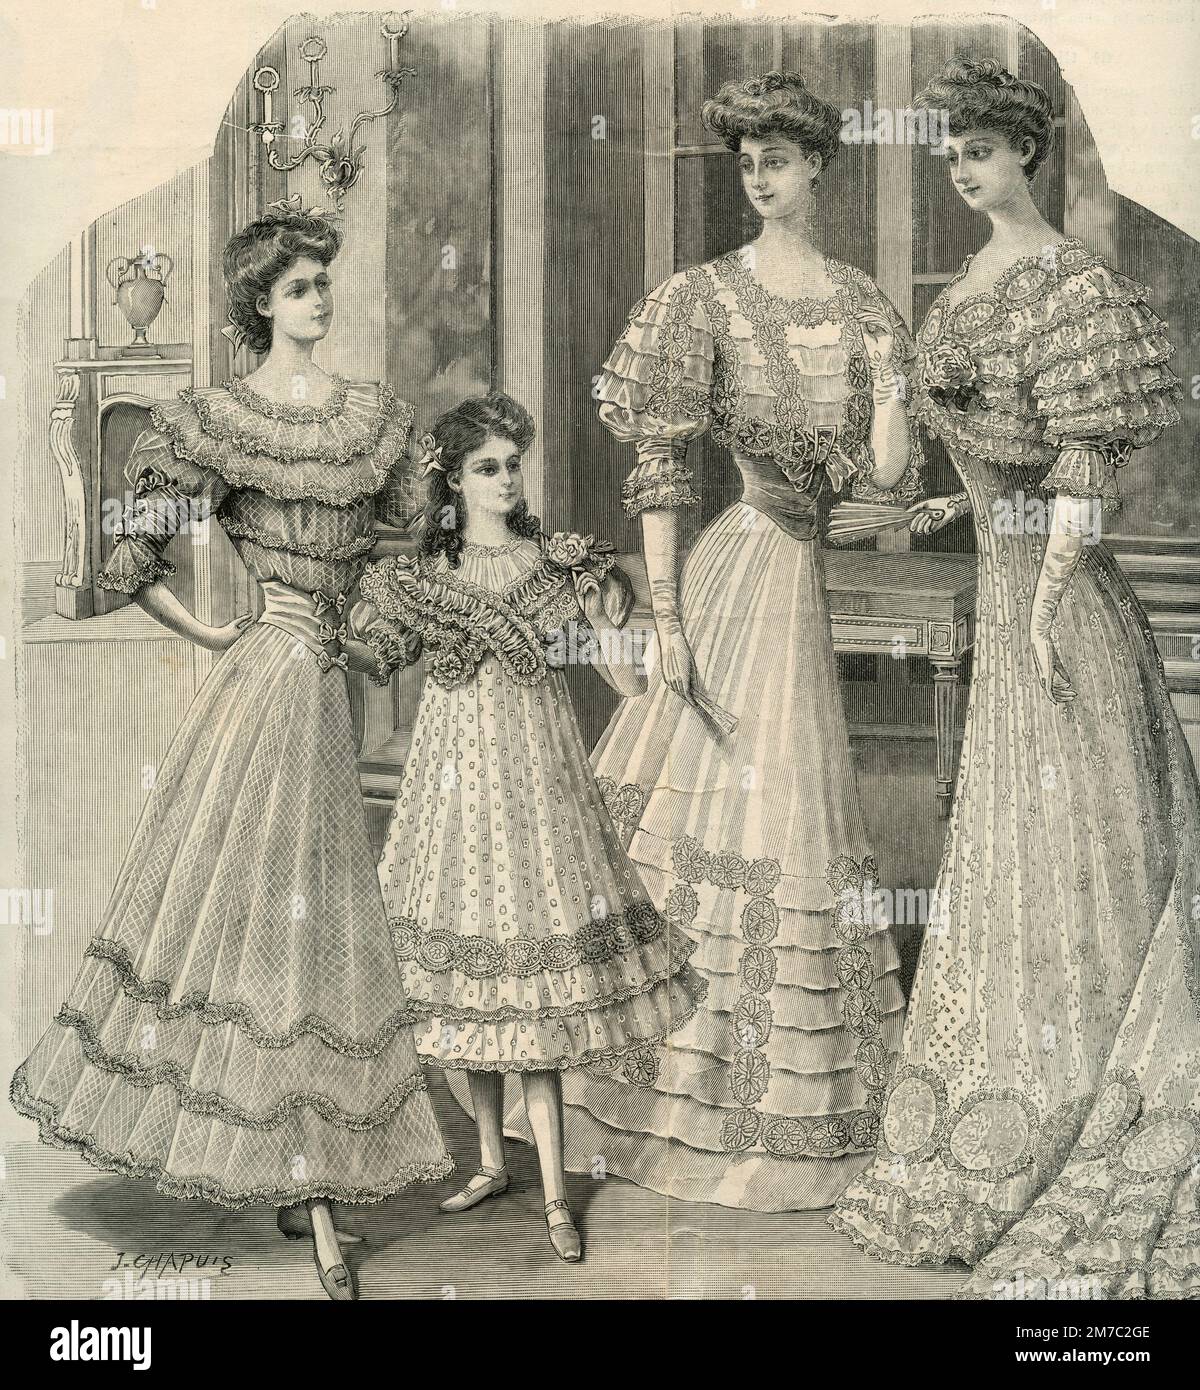 Illustration of women clothes fashion and style from vintage